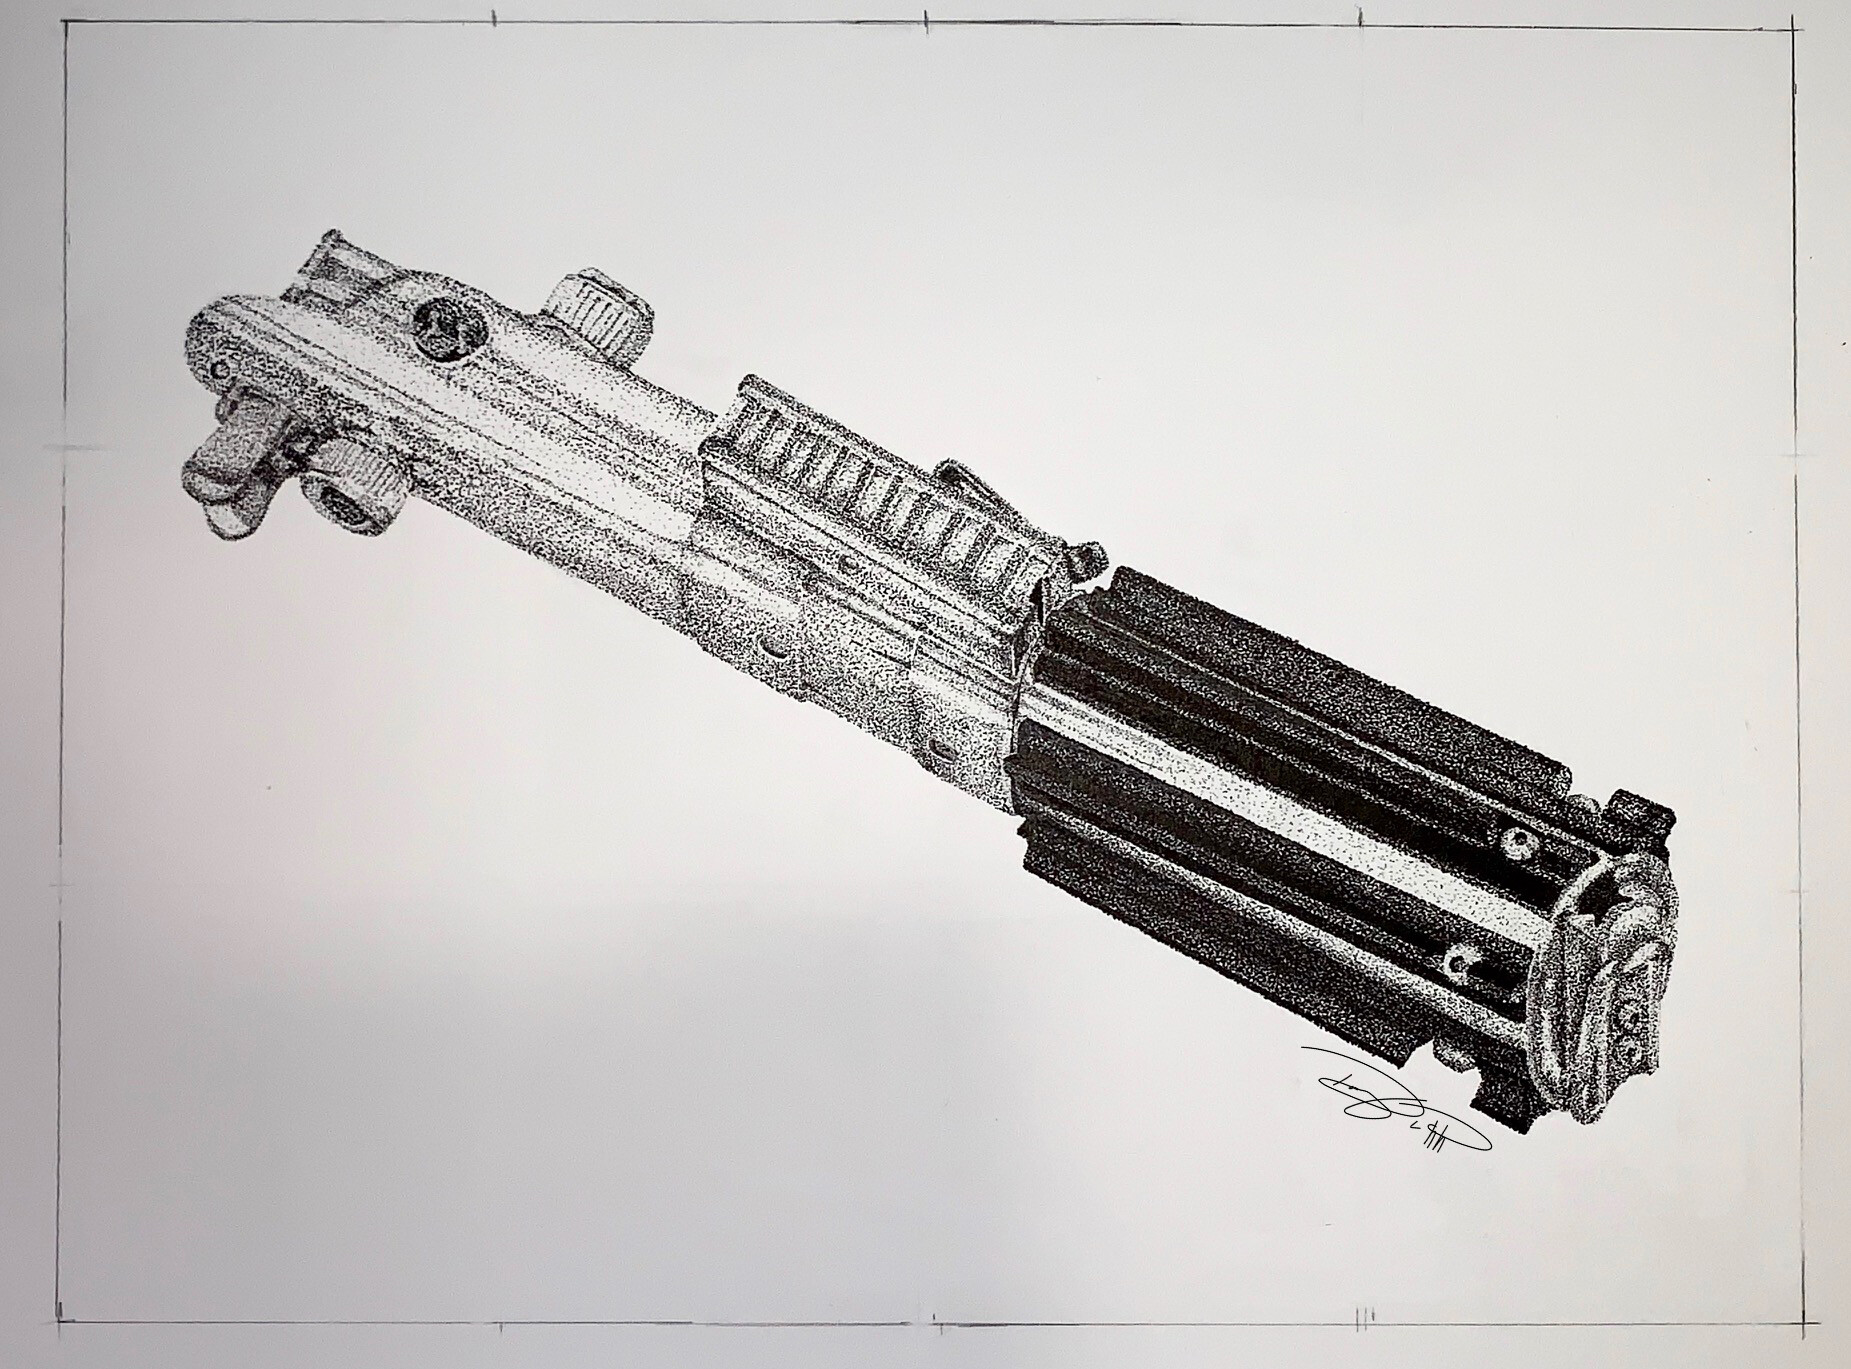 Learn How to Draw Lightsaber from Star Wars Star Wars Step by Step   Drawing Tutorials